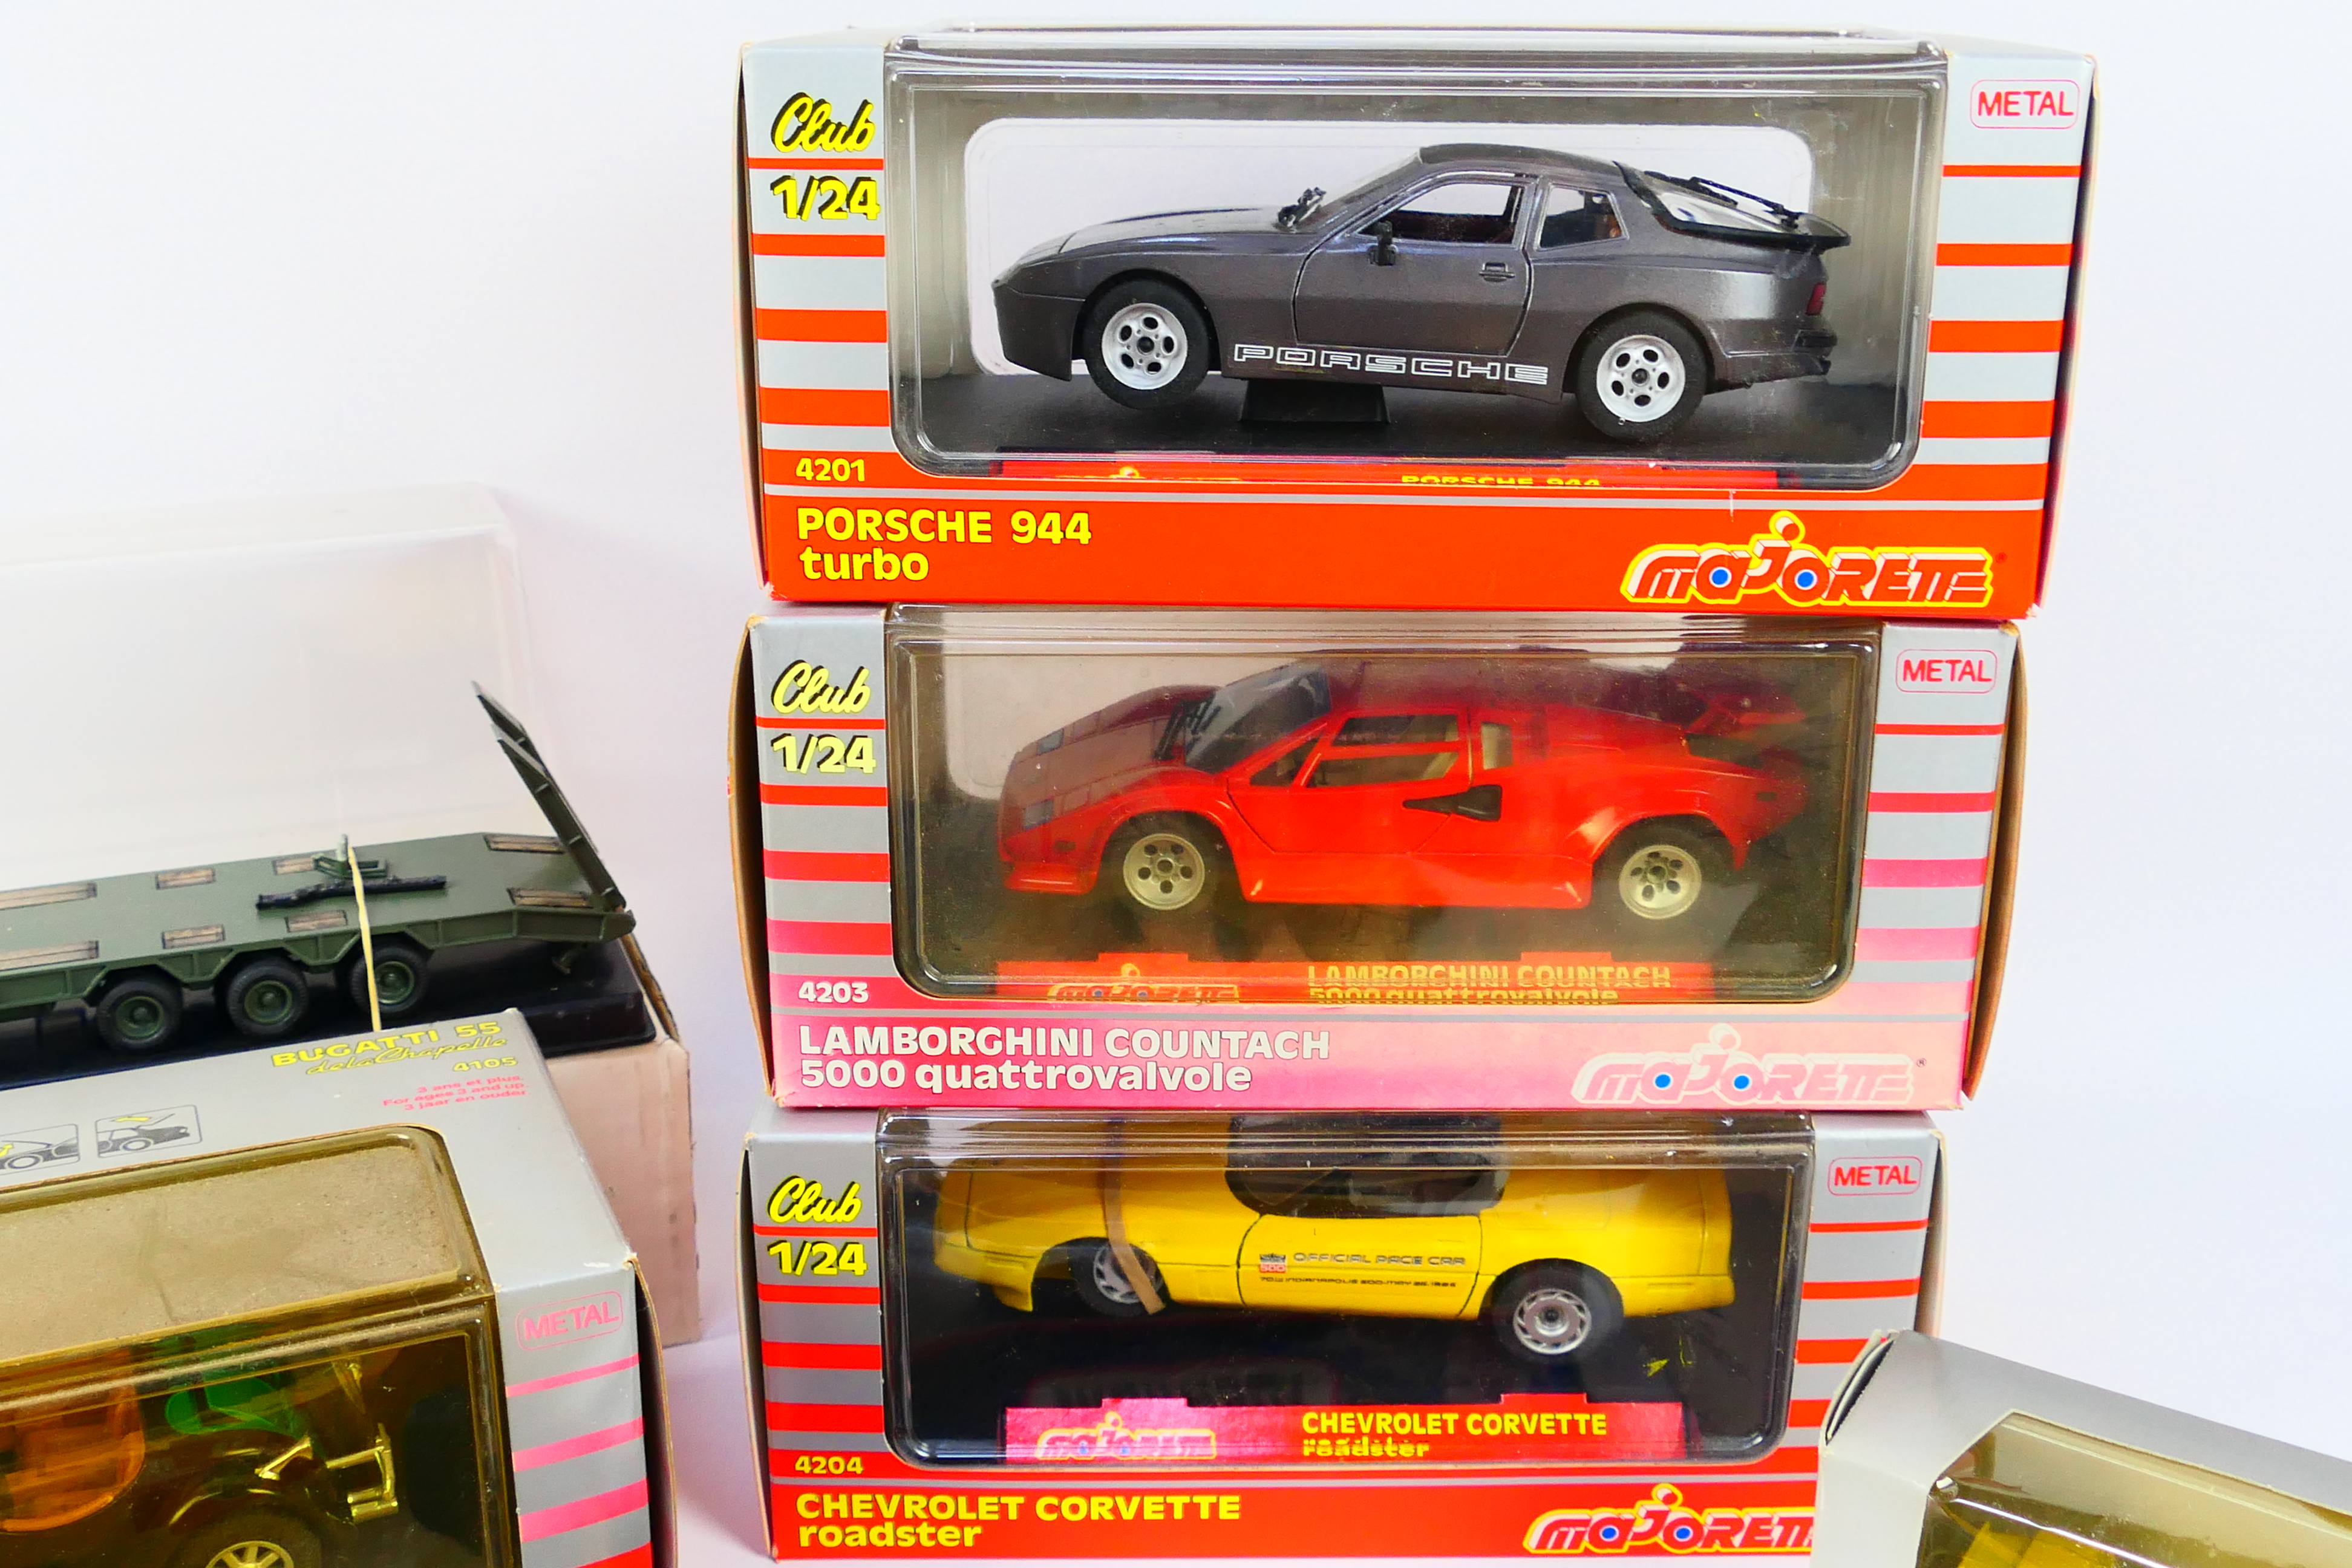 Matchbox - Majorette - Old Cars - Vanguards - 8 x boxed models including Porsche 944 in 1:24 scale, - Image 3 of 5